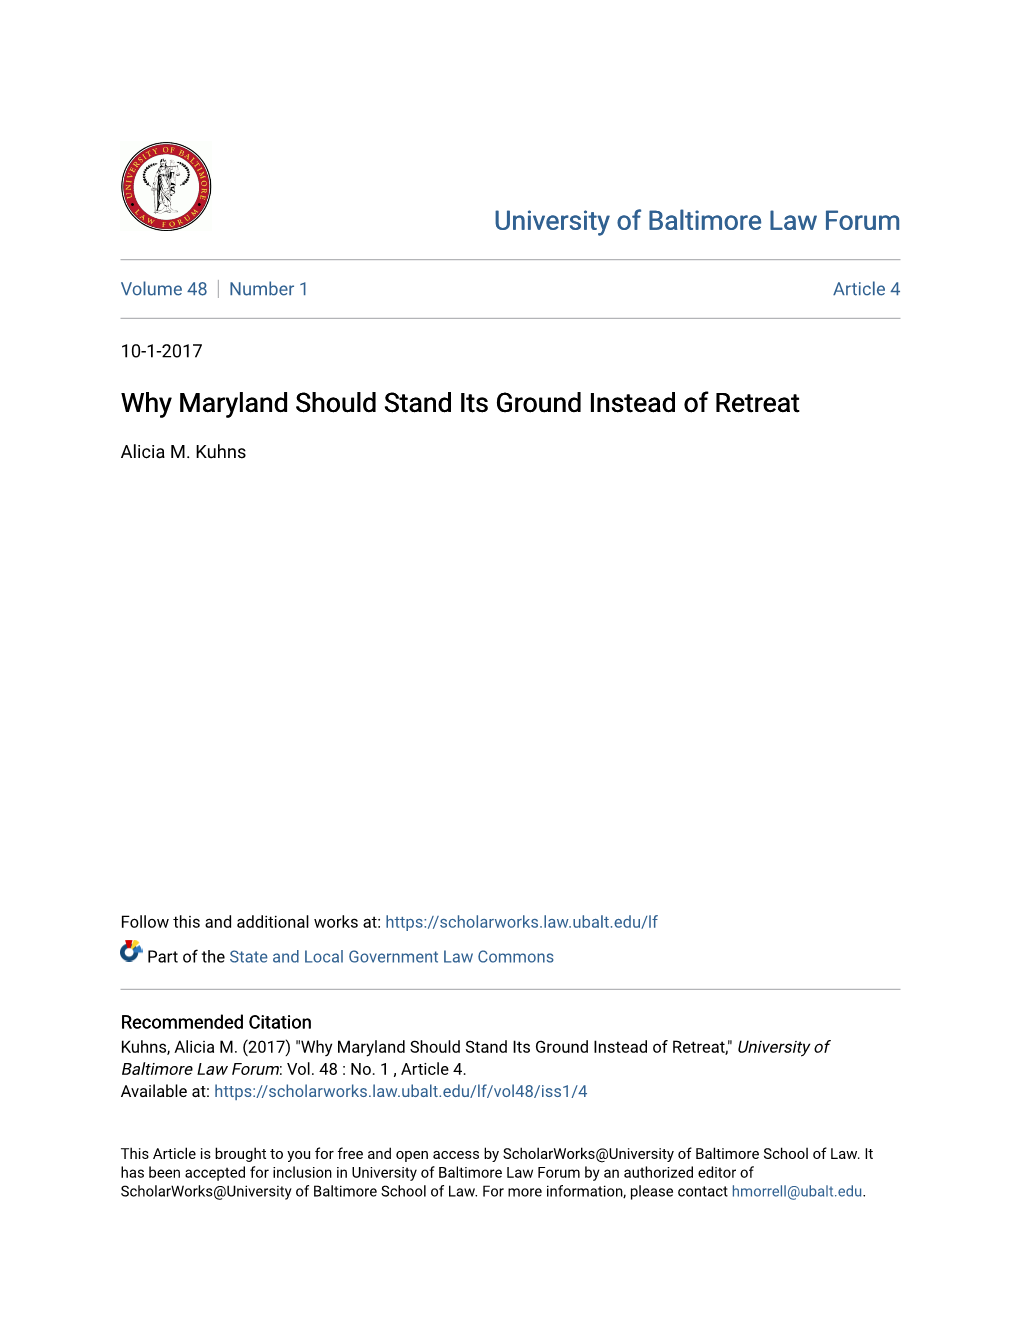 Why Maryland Should Stand Its Ground Instead of Retreat